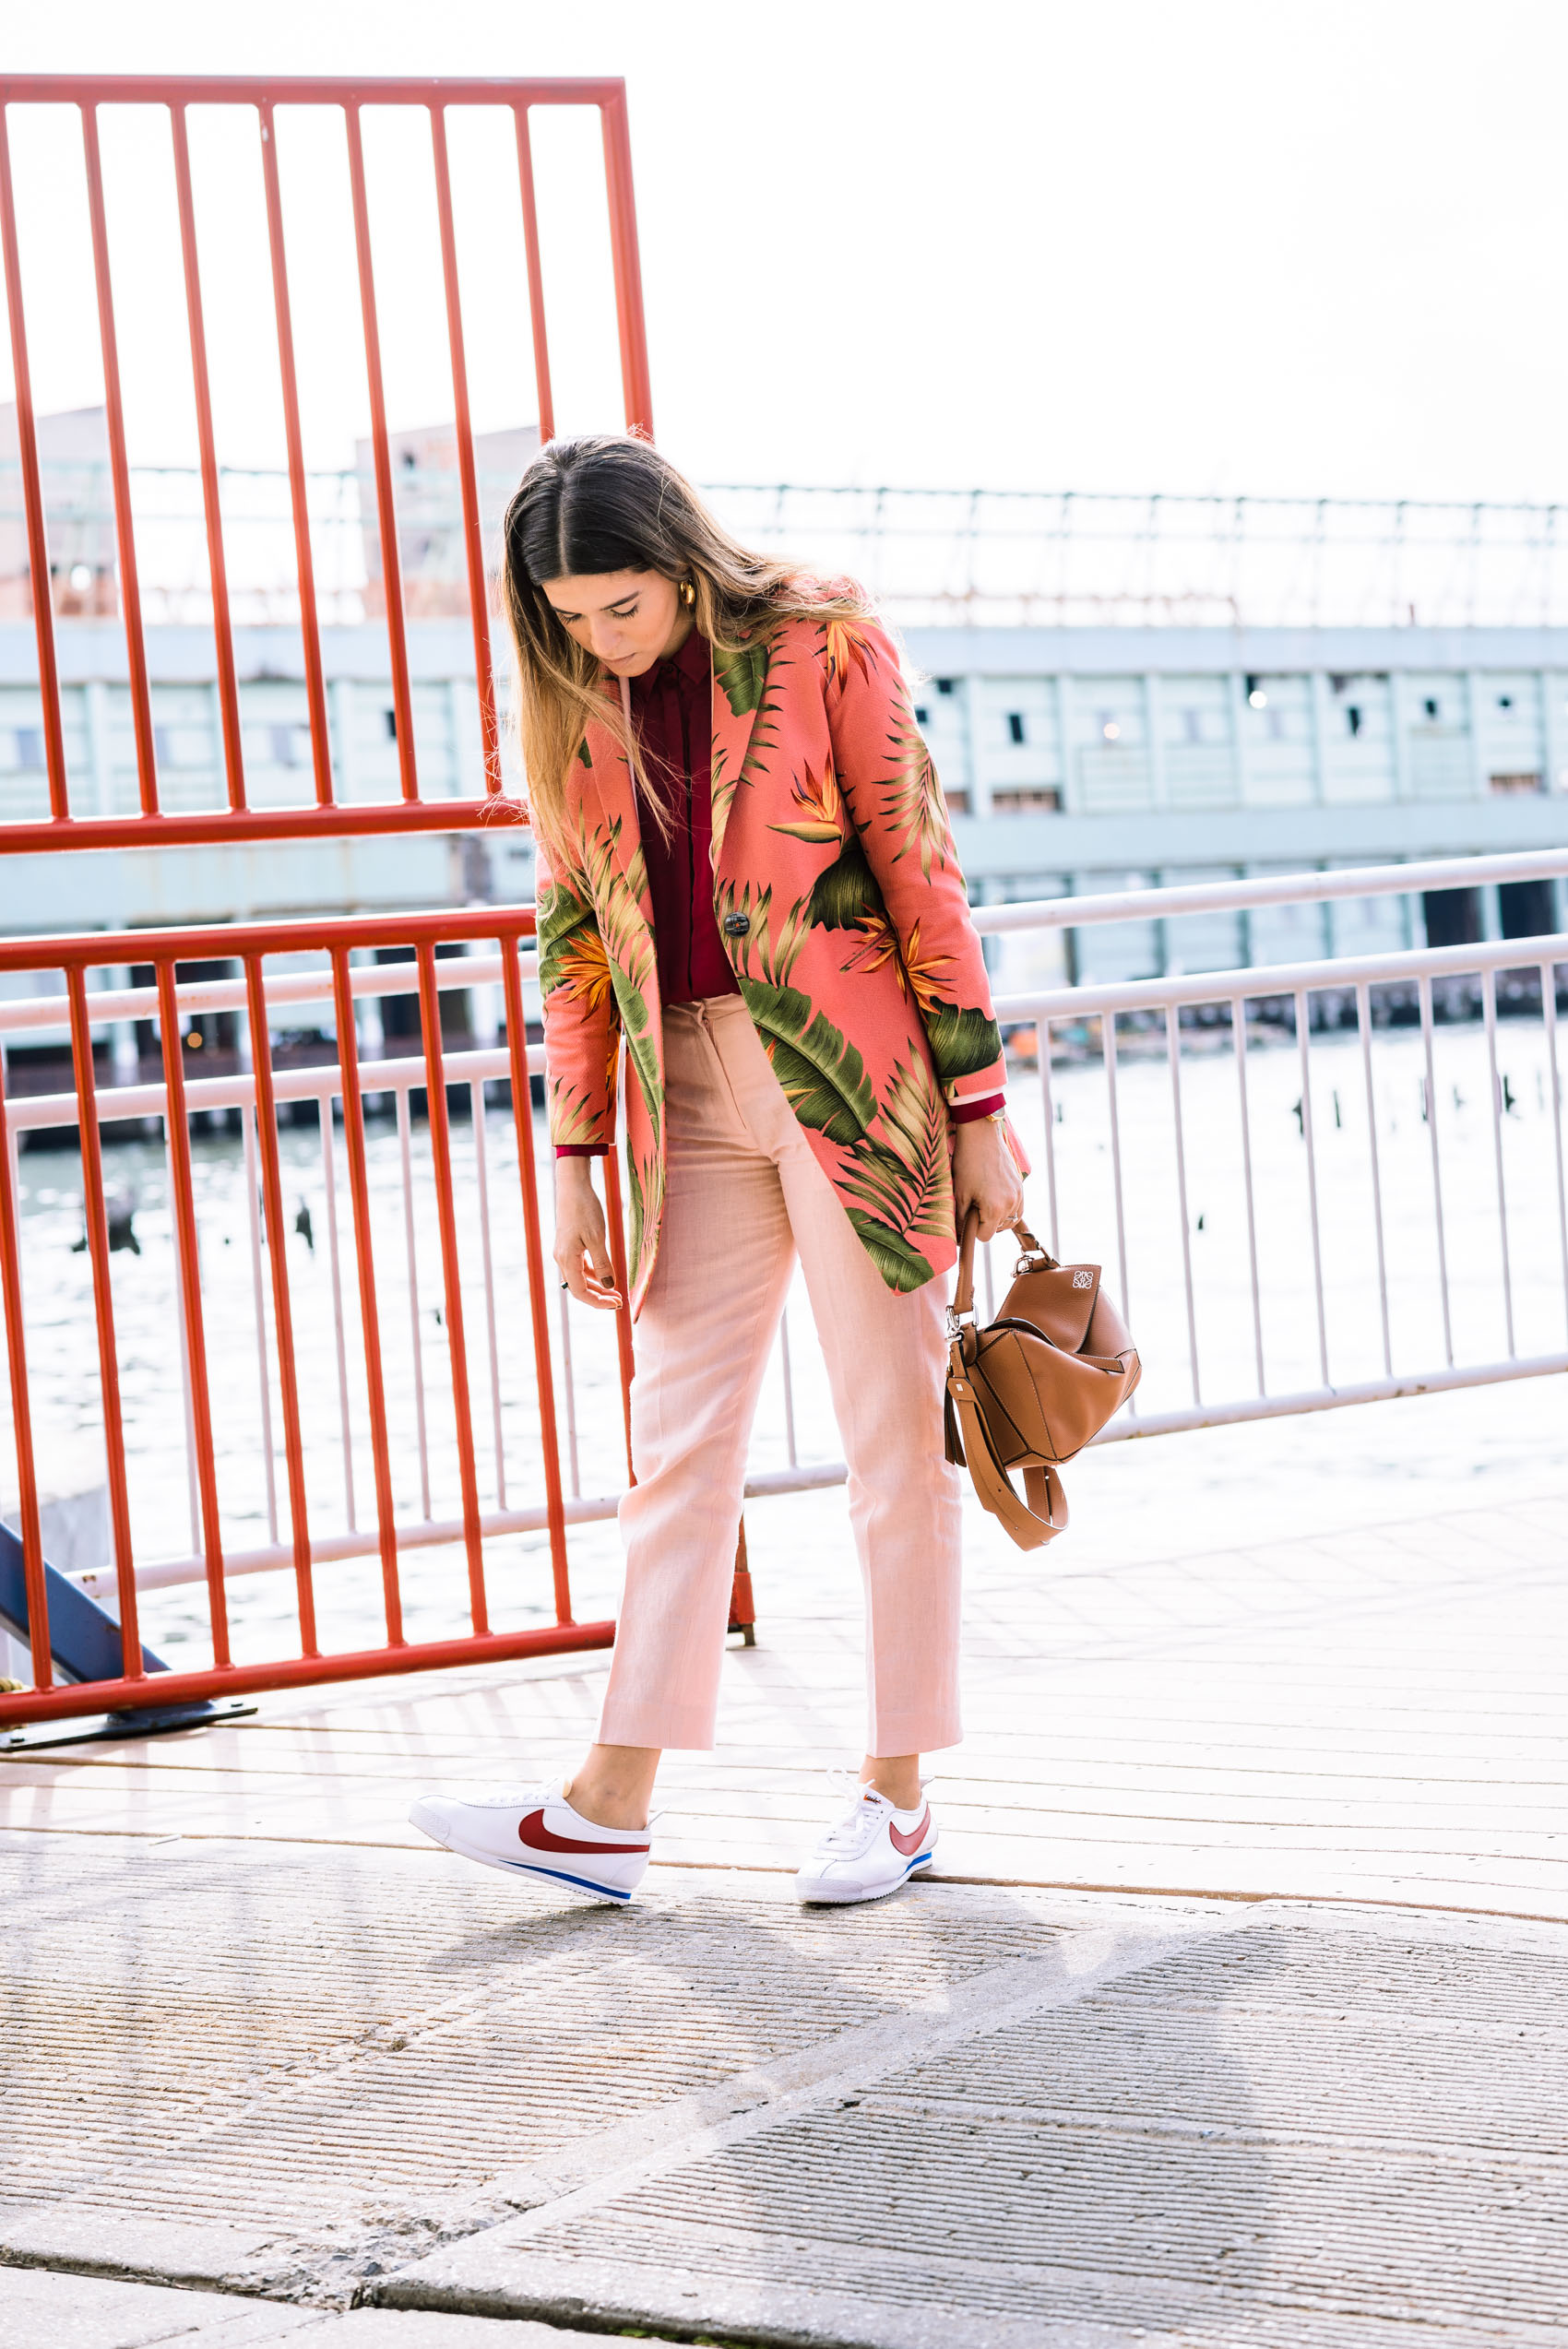 Blogger Maristella's NYFW look with Atelier Crump floral printed blazer and suit, Nike Cortez sneakers and Loewe Puzzle bag